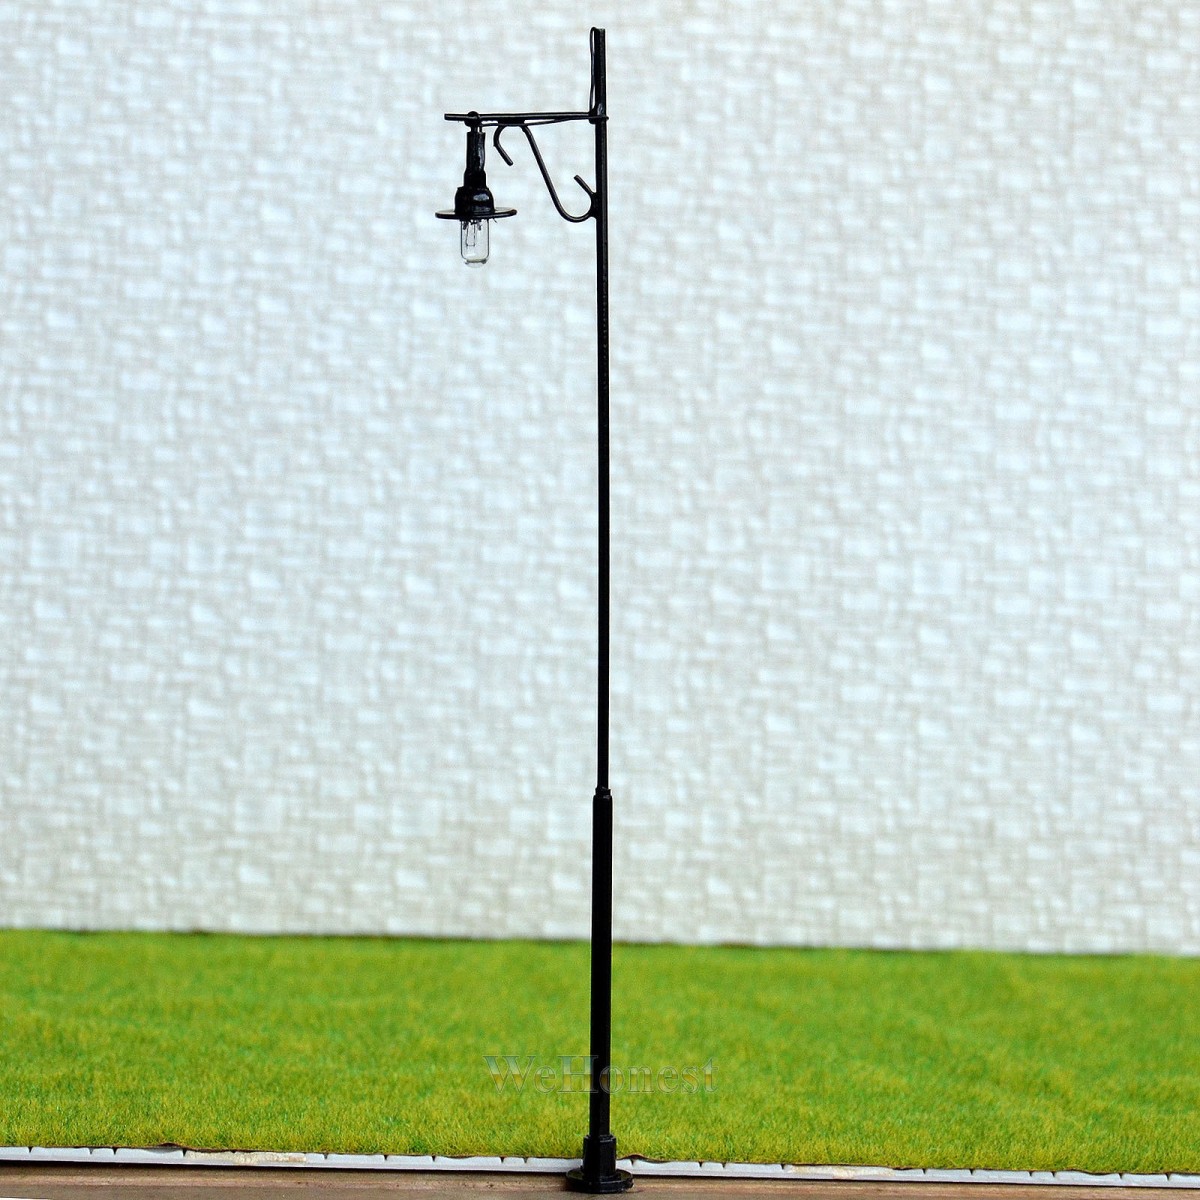 1 x O scale Raplaceable Model Lamppost street light Lamp easy Maintain #RB34-O